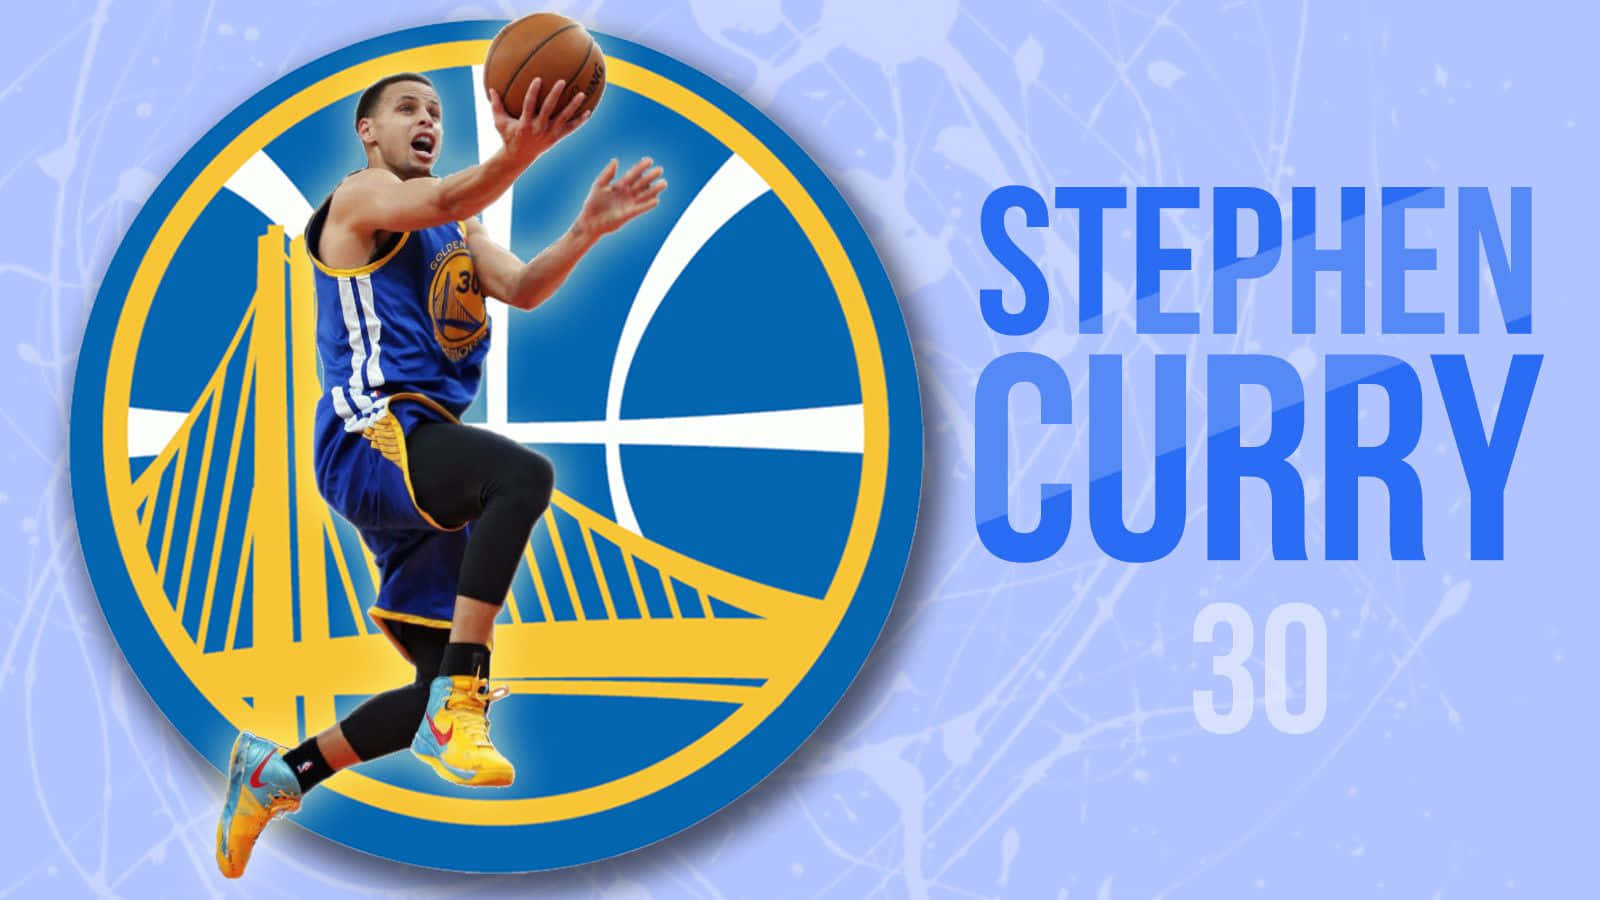 "Stephen Curry slaying the competition with his coolness" Wallpaper